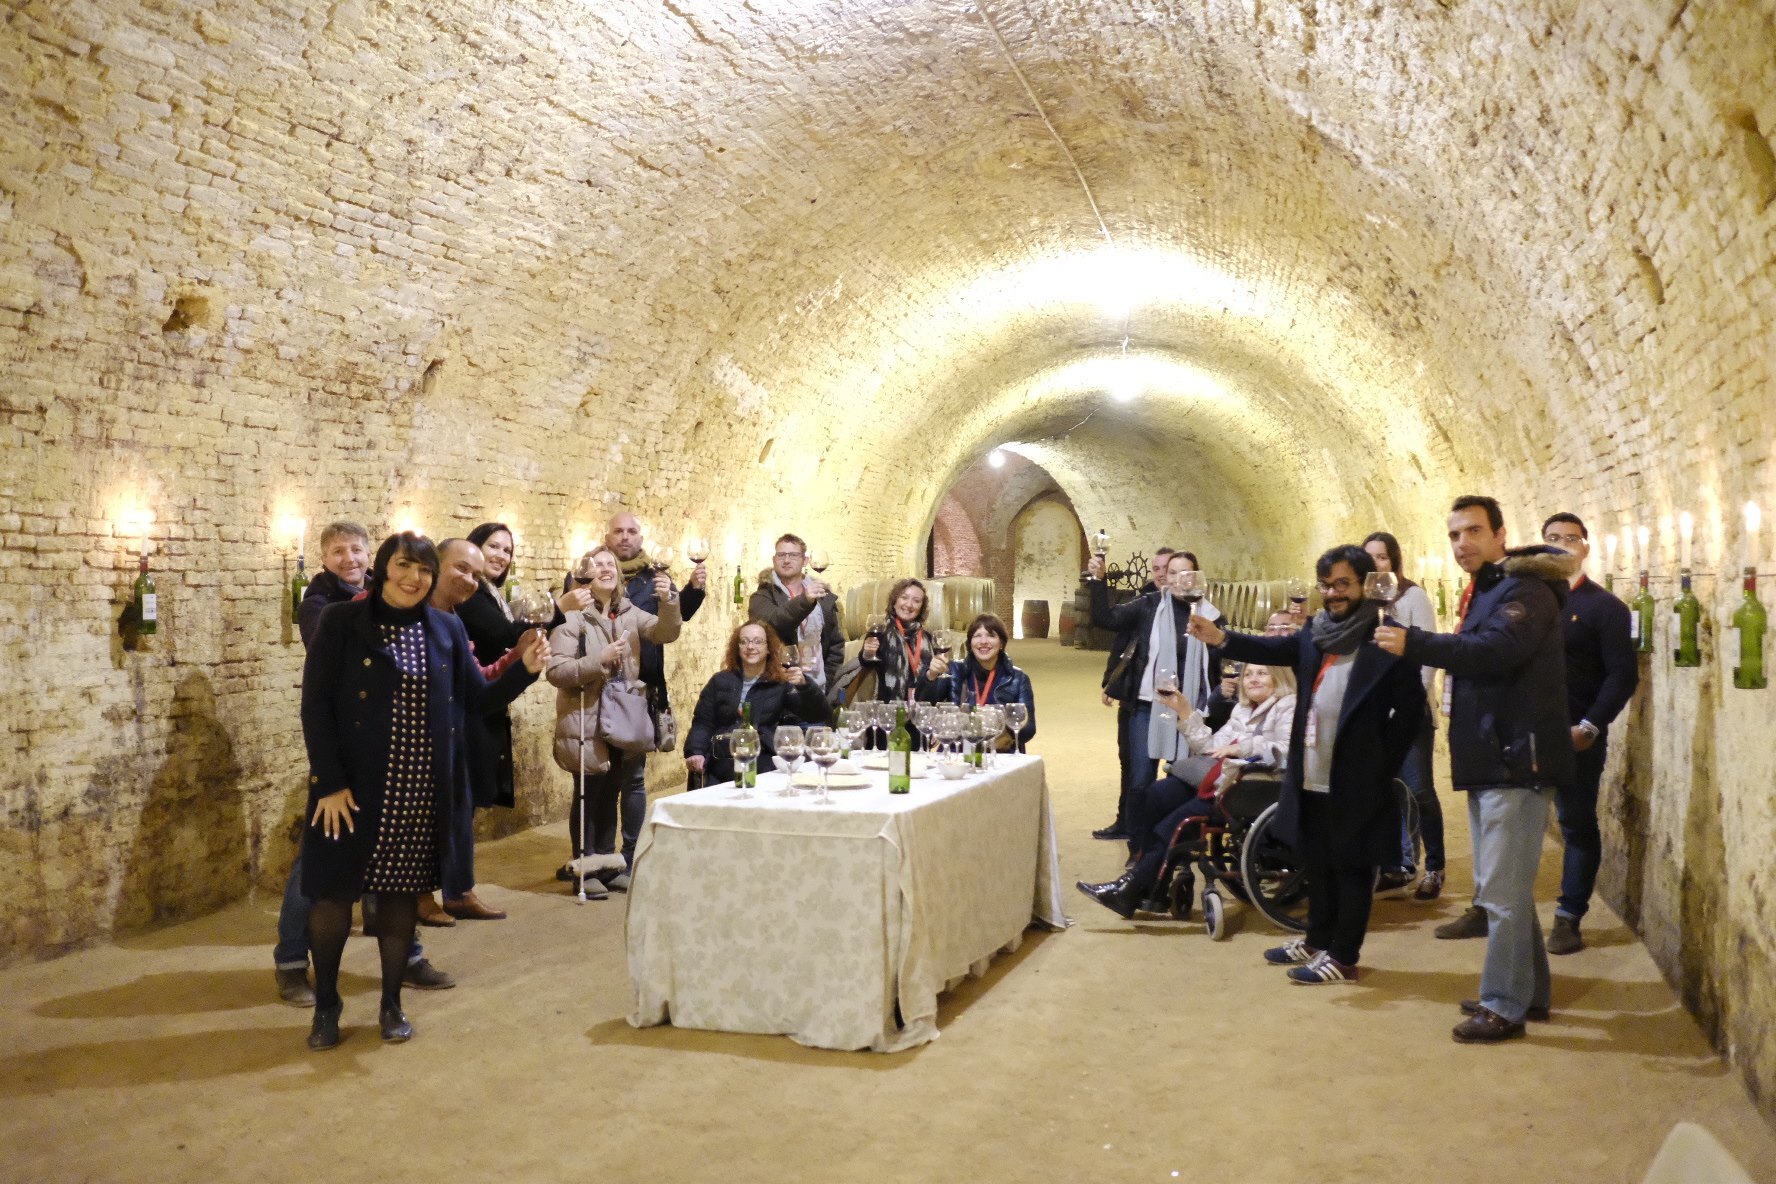 Assistants Accessible Congress For All Provide in a cellar